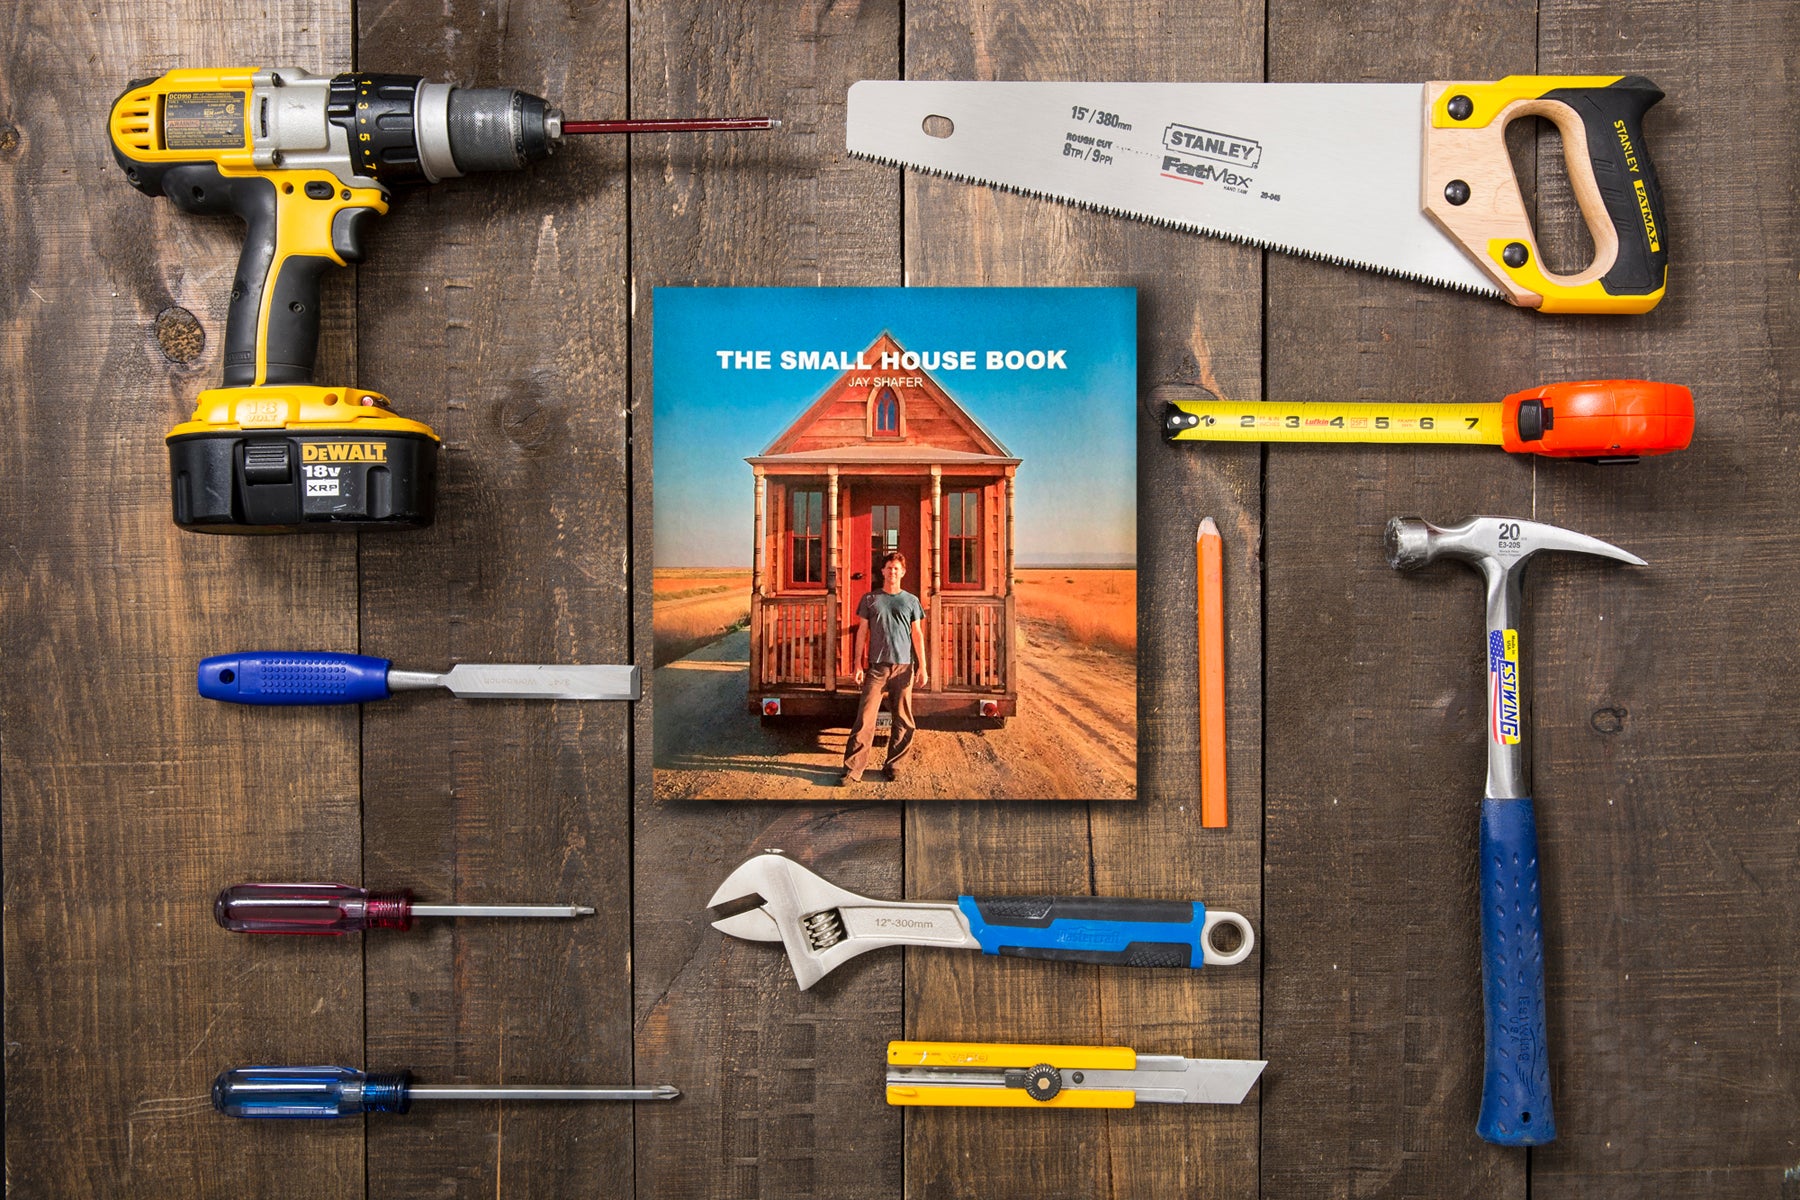 The Small House Book, by Jay Shafer, sits on a wood surface, surrounded by tools.